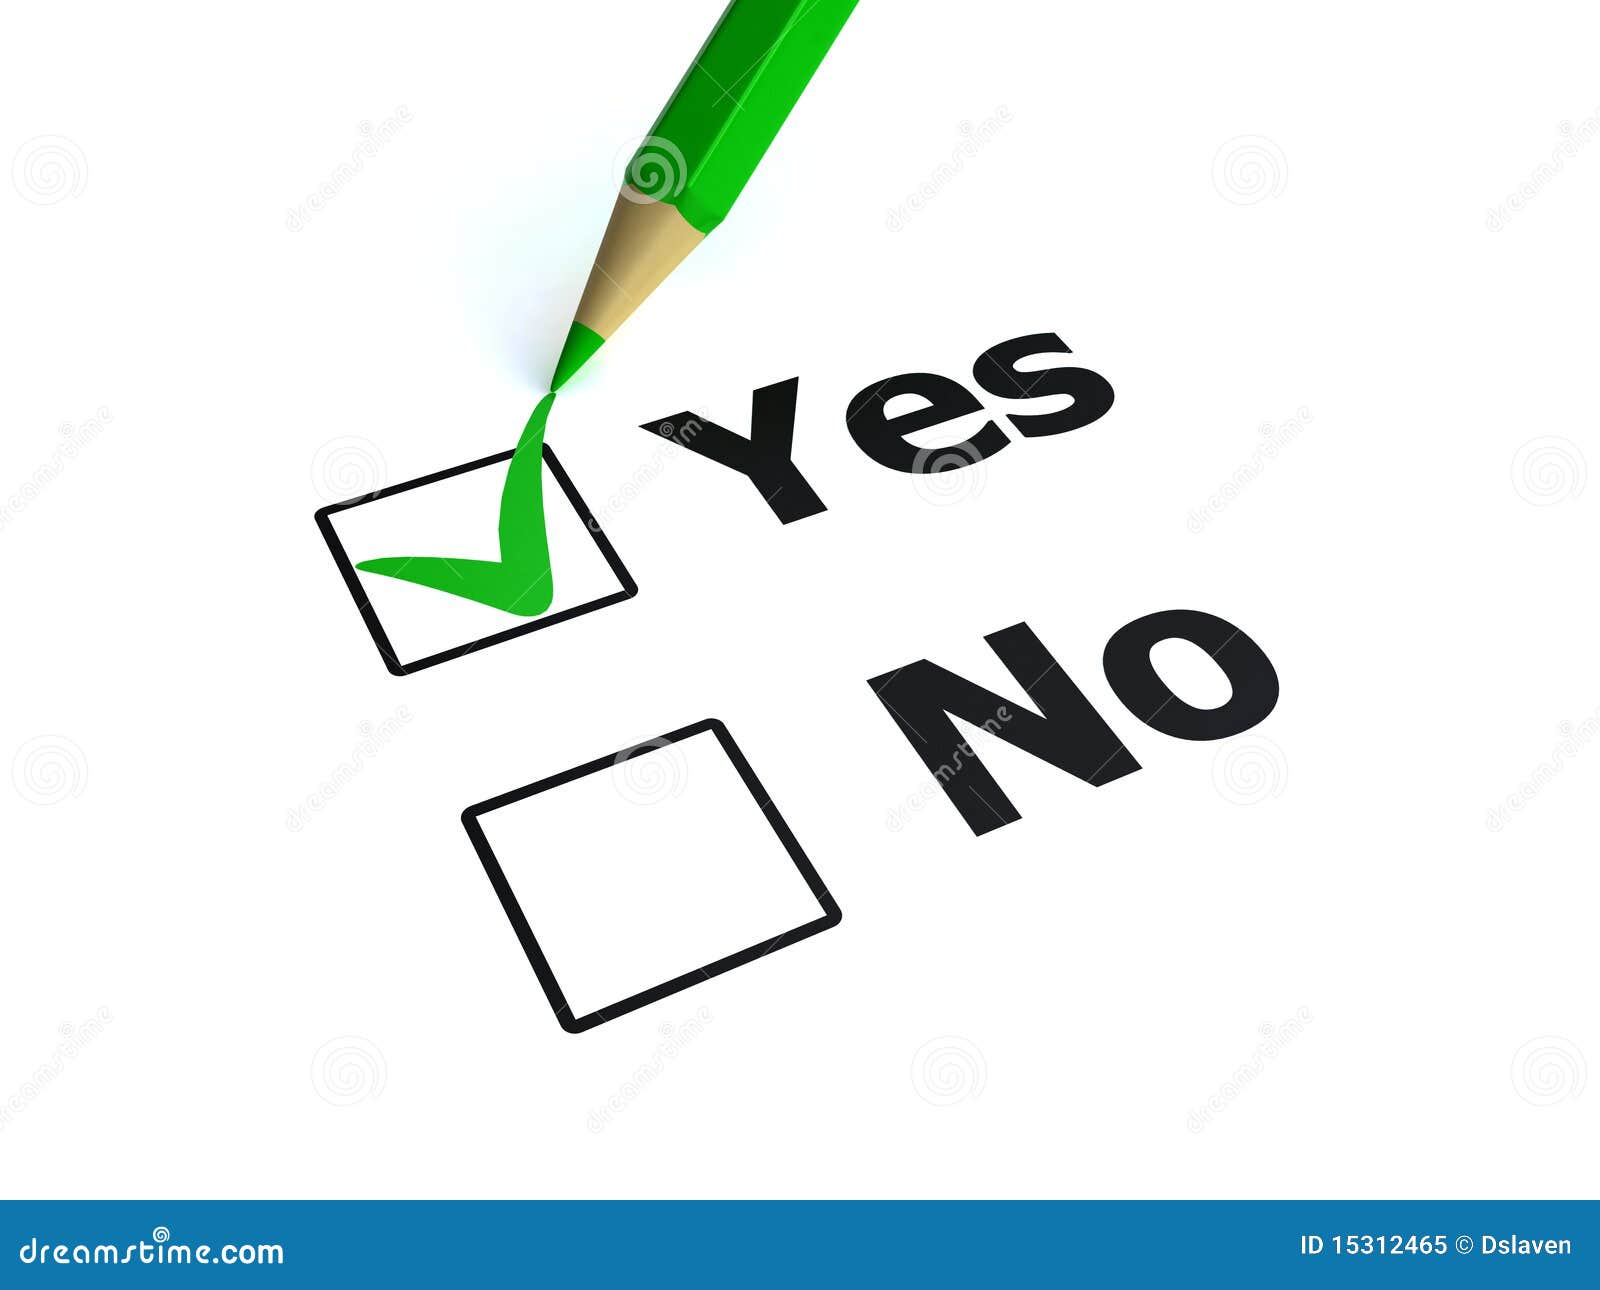 free clipart vote yes - photo #7